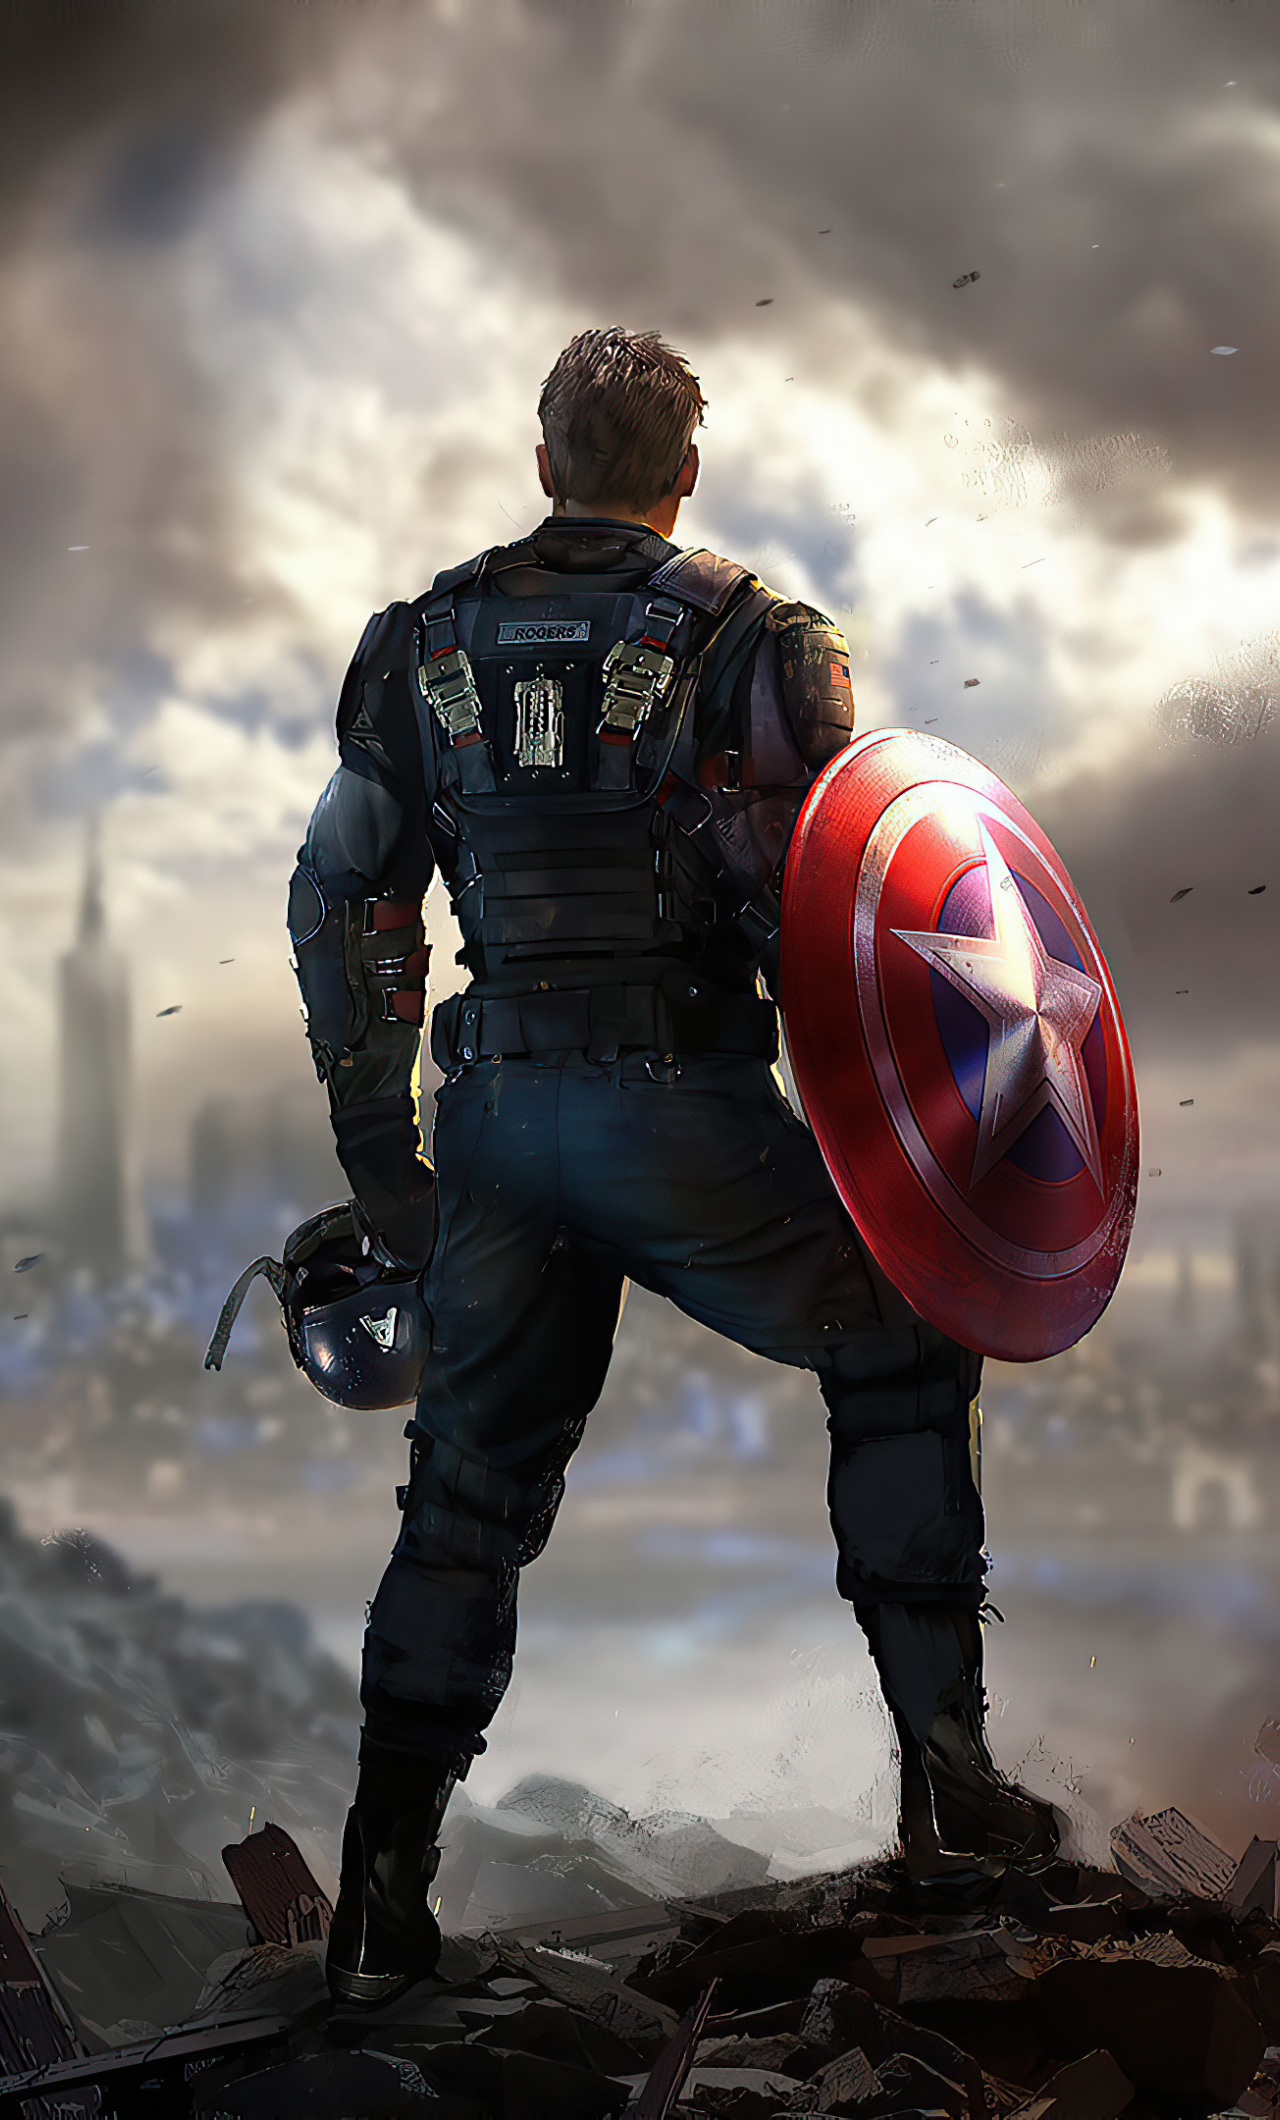 Download wallpaper 1280x2120 captain america, marvel's avengers, first  avenger, iphone 6 plus, 1280x2120 hd background, 25946